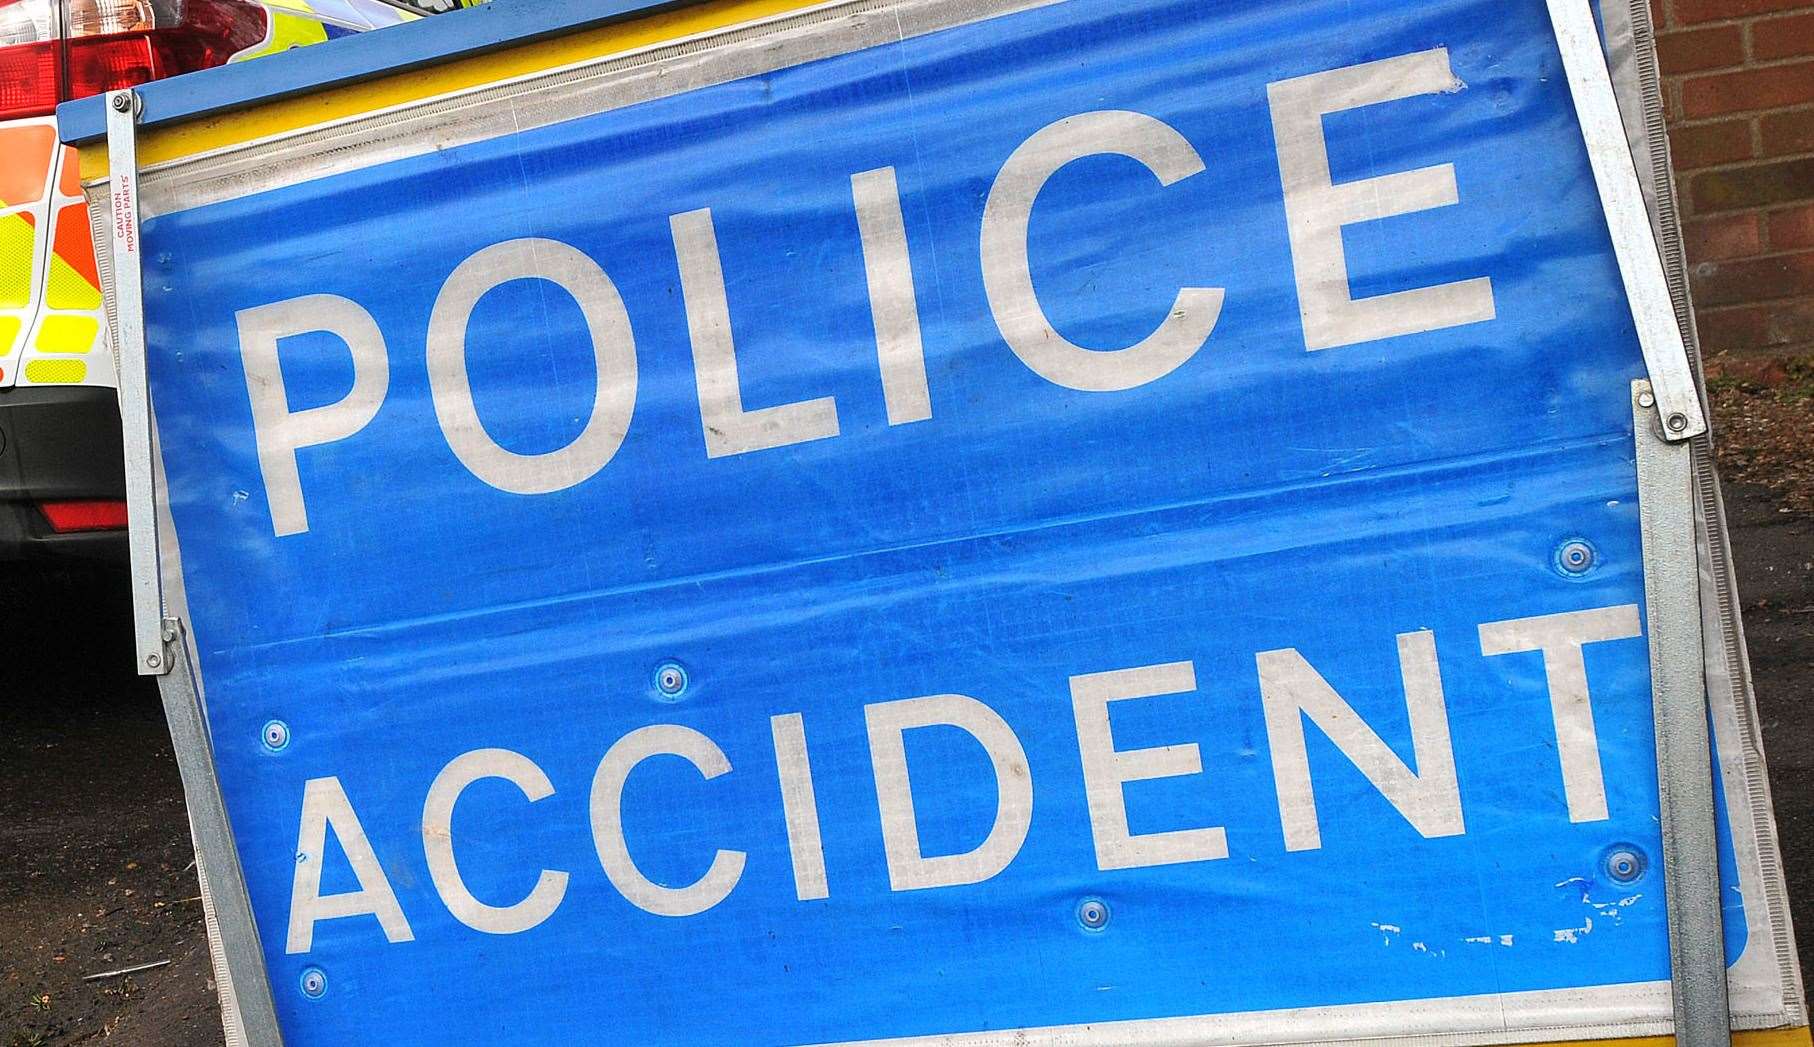 Police on the scene of an RTC - Norfolk Police accident sign. (17503368)